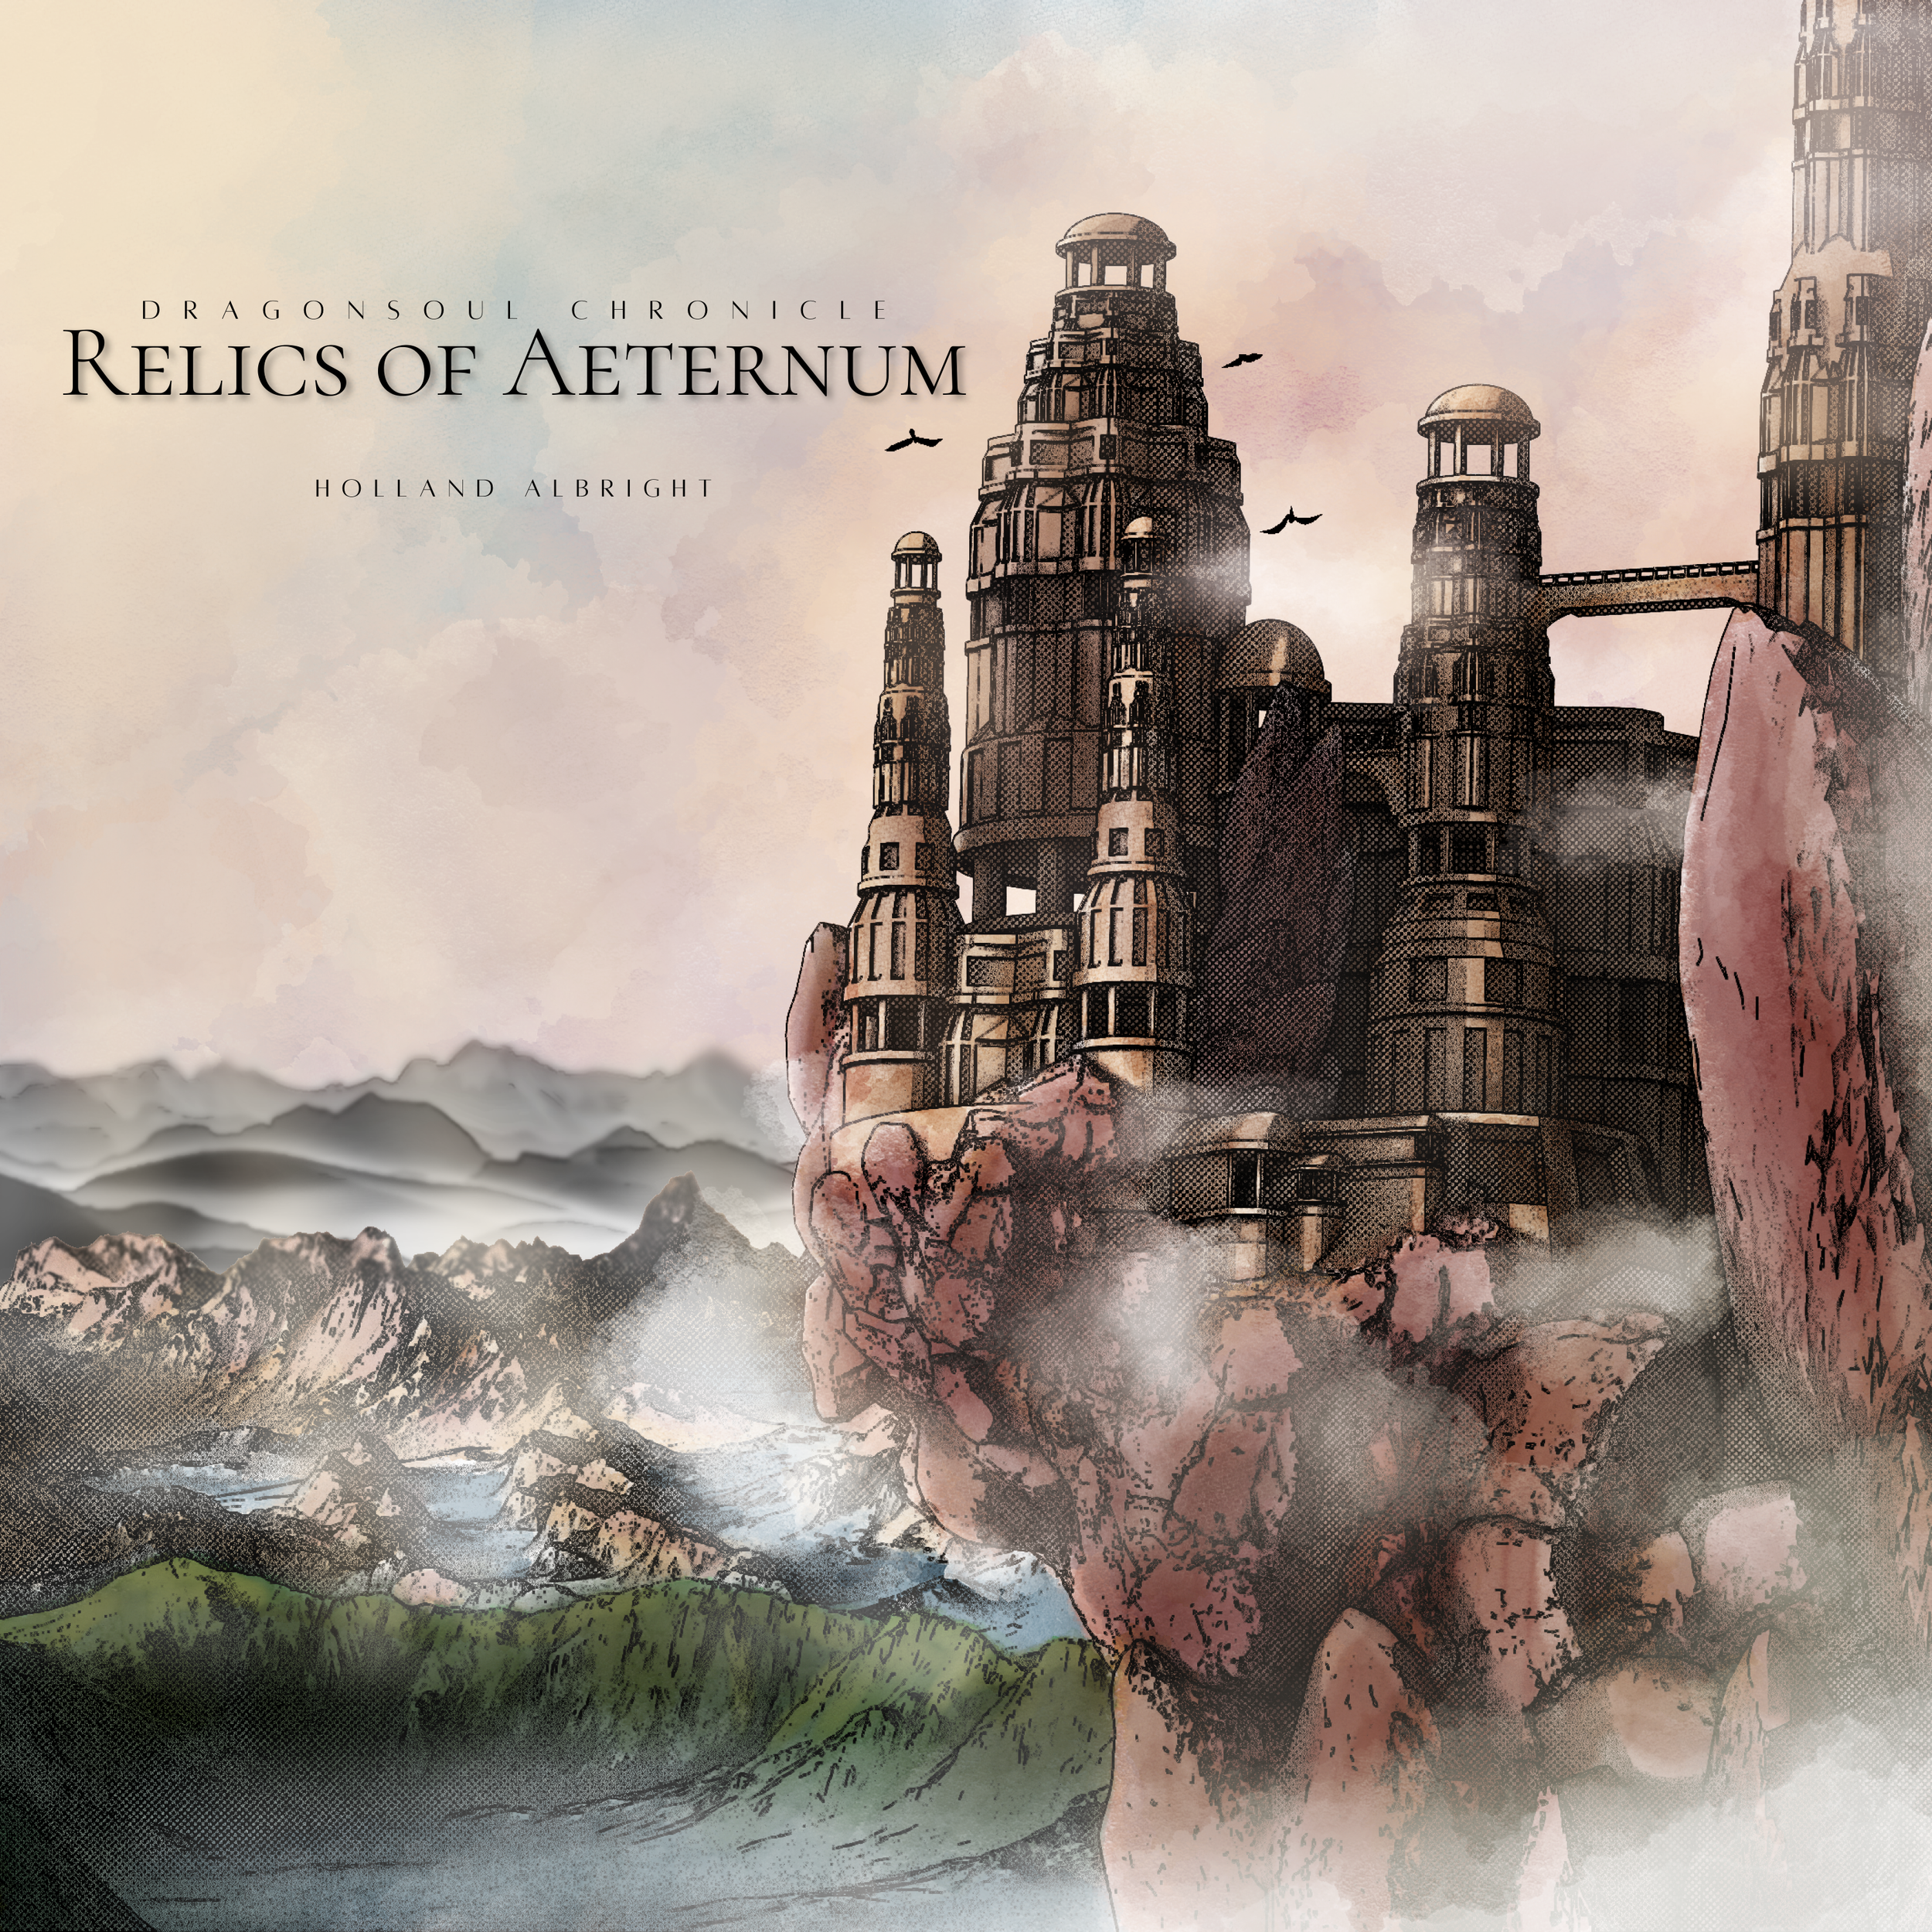 Relics of Aeternum: Dragonsoul Chronicle